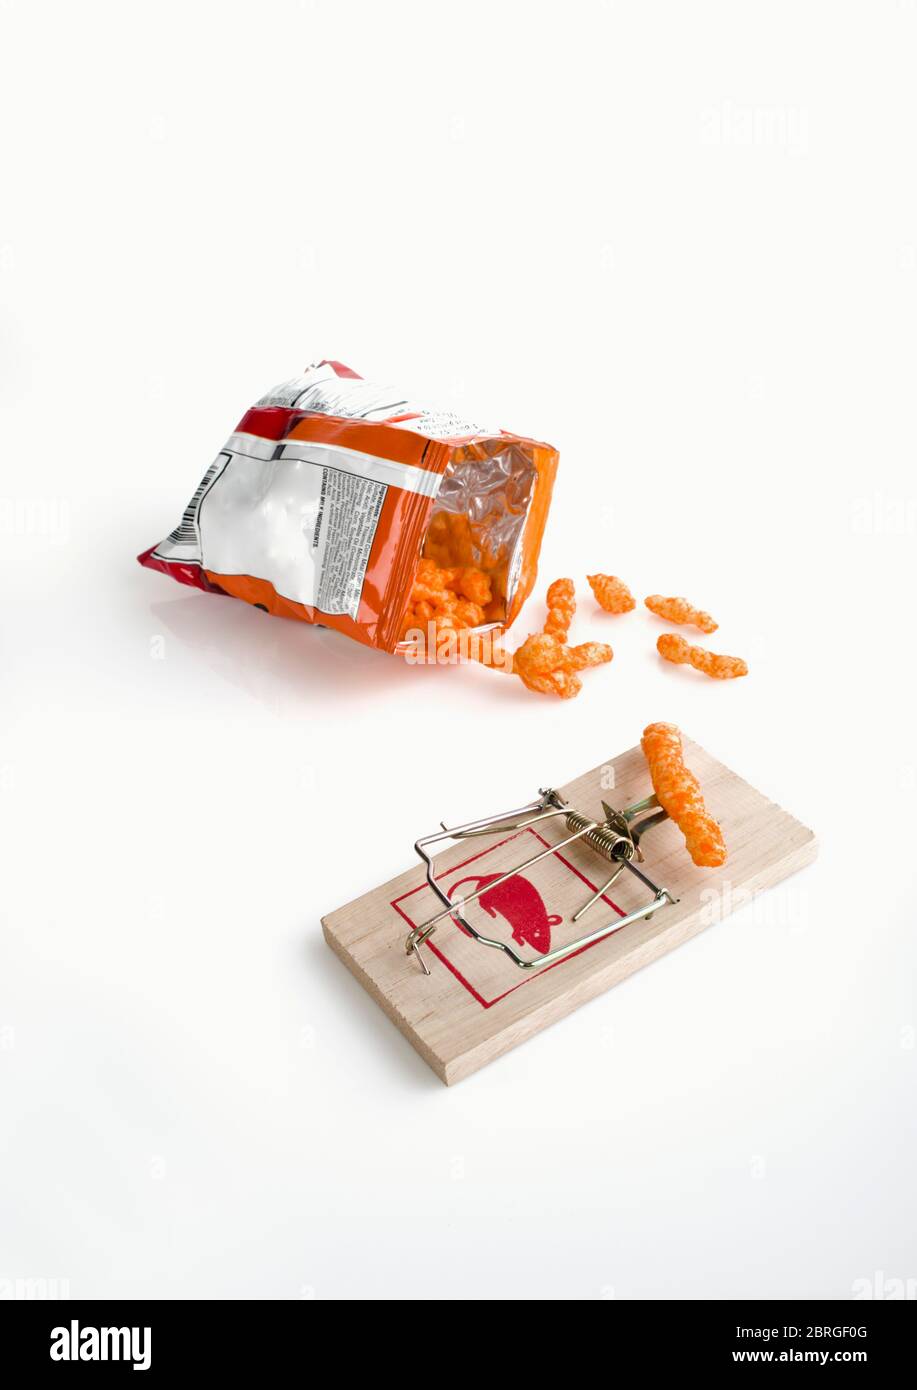 https://c8.alamy.com/comp/2BRGF0G/a-concept-photo-with-mouse-trap-and-snack-food-2BRGF0G.jpg